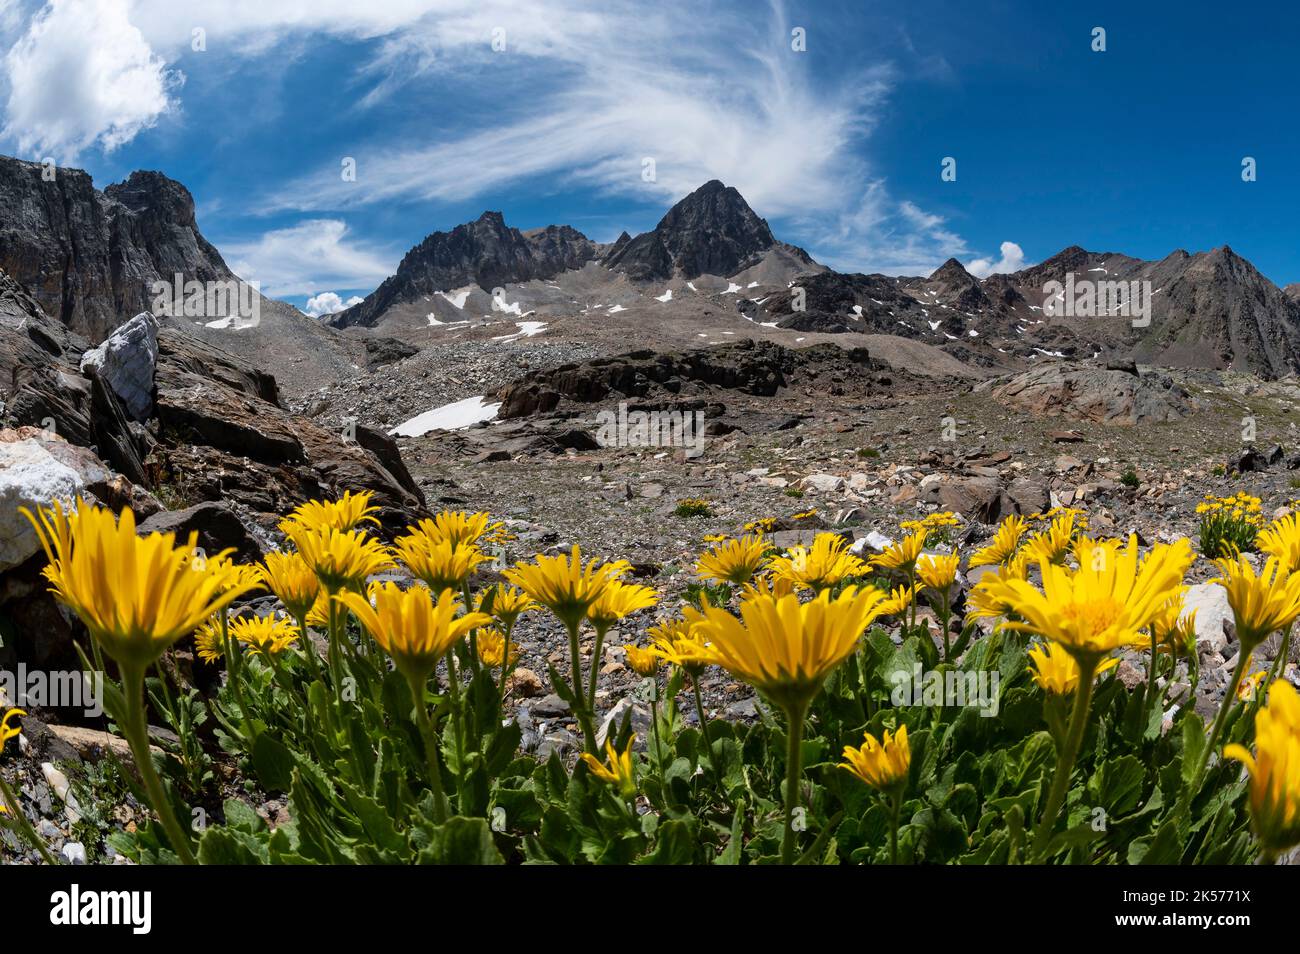 France, Savoie, Valmeinier, Thabor massif, trek around the Thabor, at the Chaval Blanc pass, flowers of Doronic and the peaks of the Chaval Blanc, , the Pic du Thabor and the Thabor Stock Photo